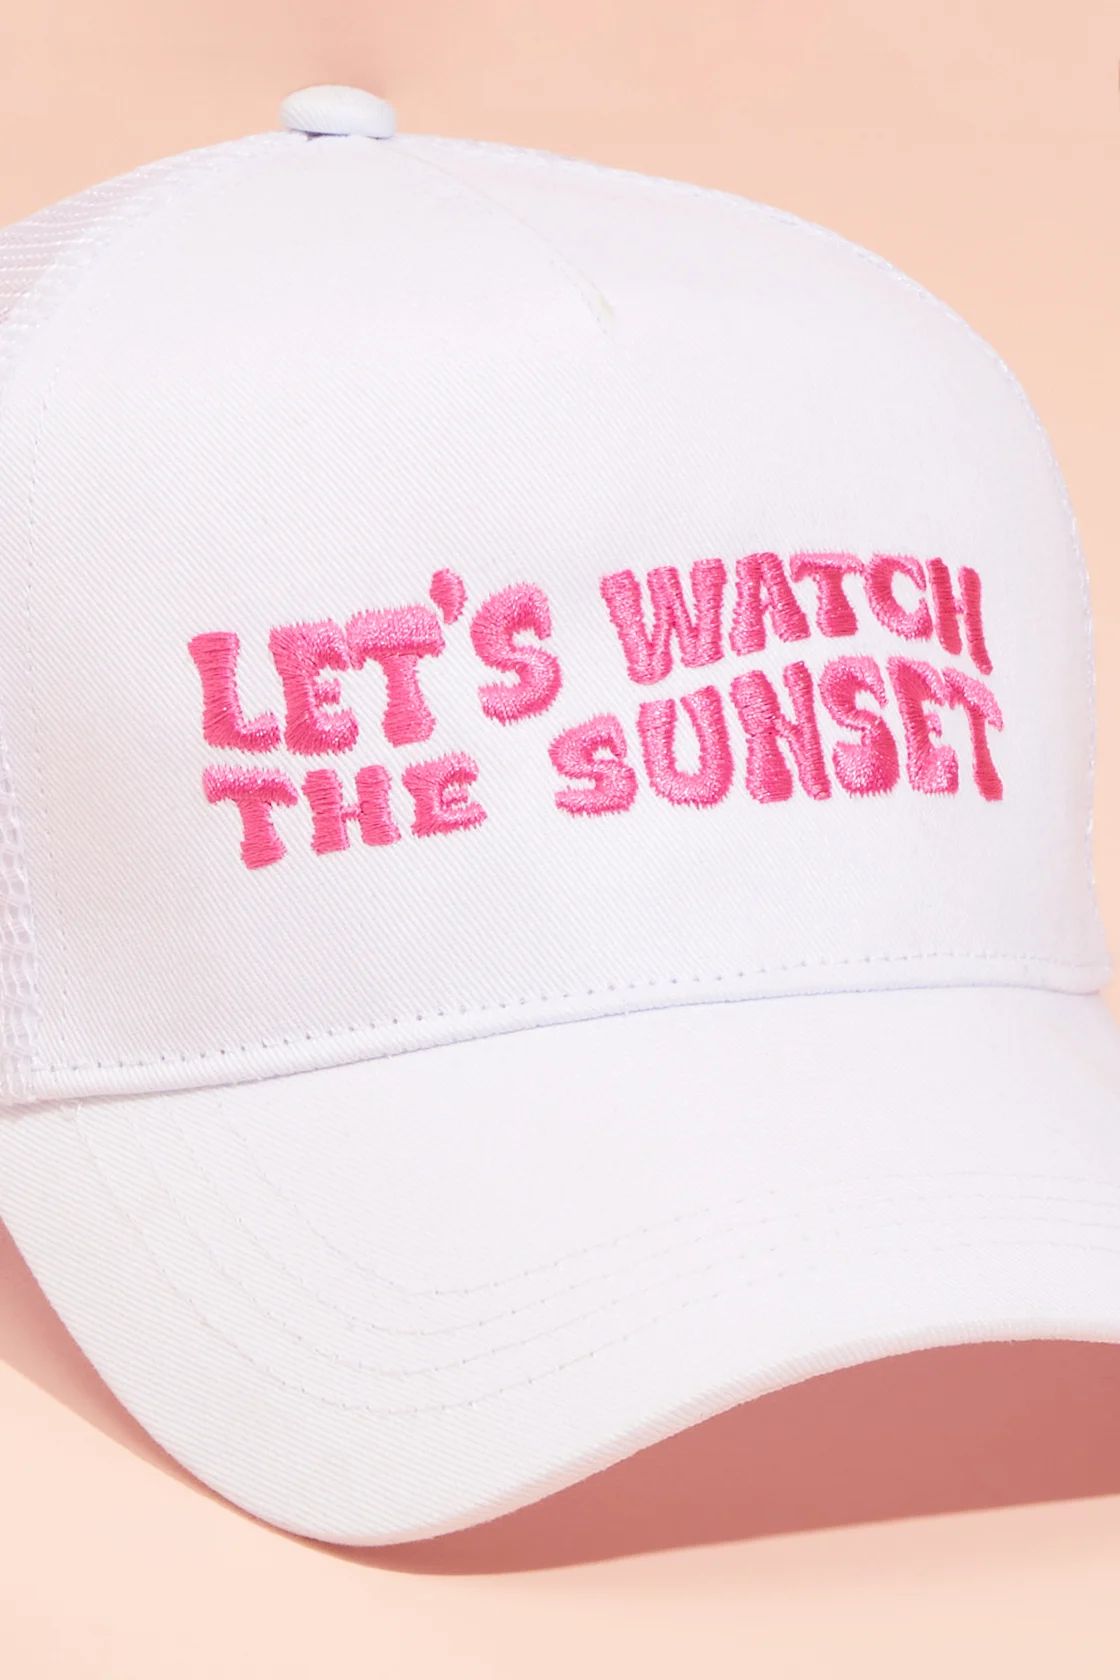 Let's Watch The Sunset Trucker Hat in White | Altar'd State | Altar'd State